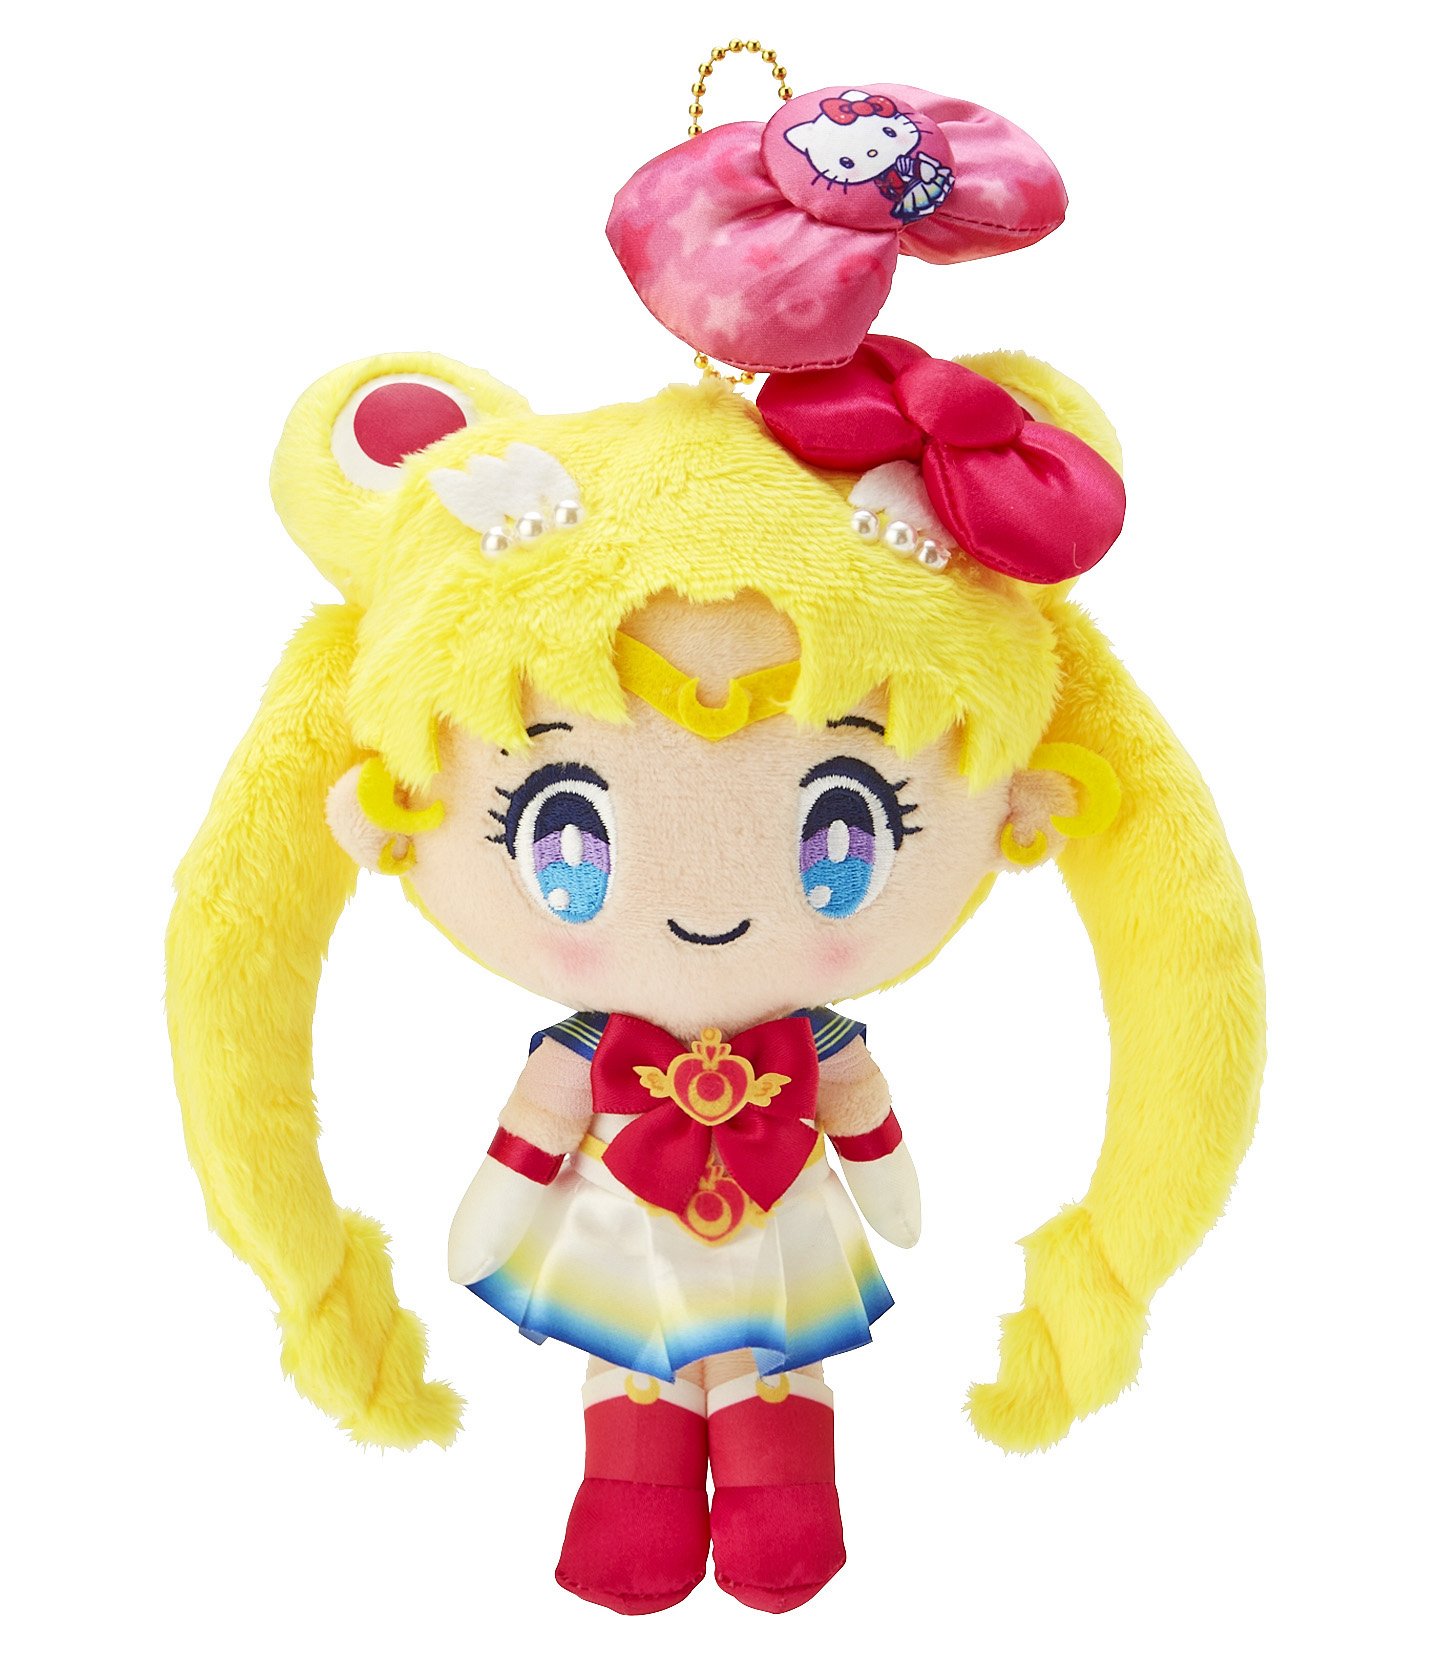 Sailor Moon and Sanrio characters set to team up in special